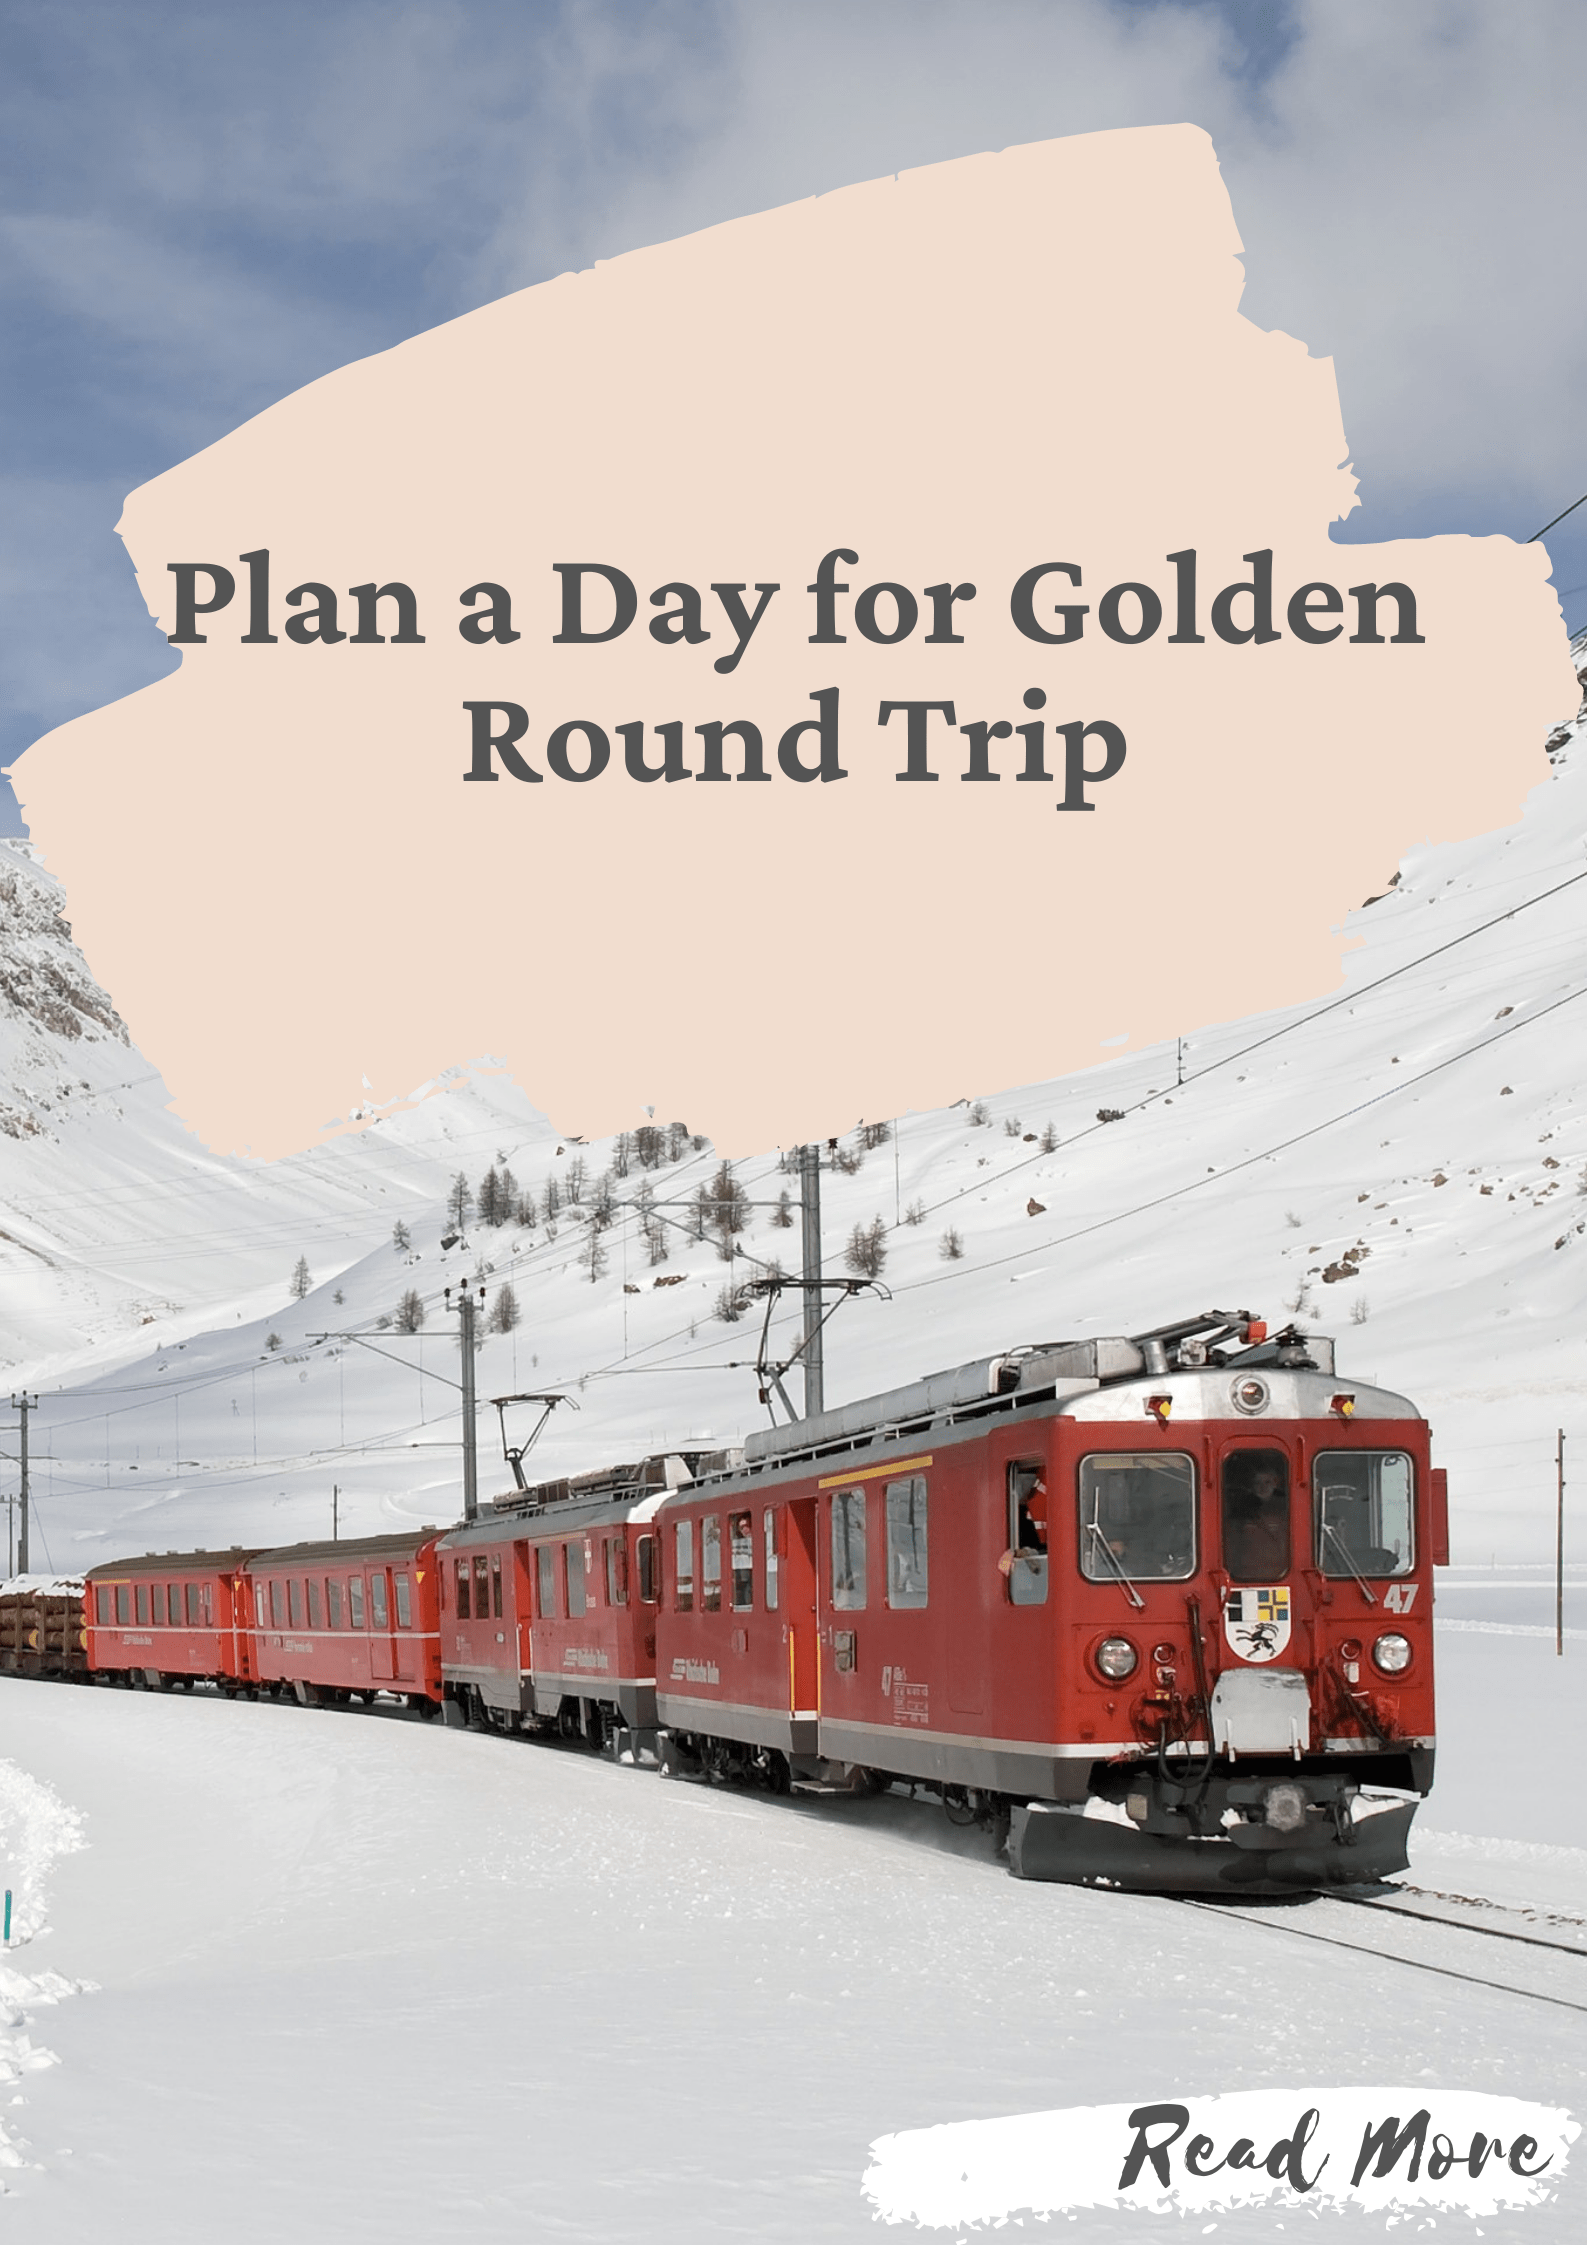 Plan a Day for Golden Round Trip